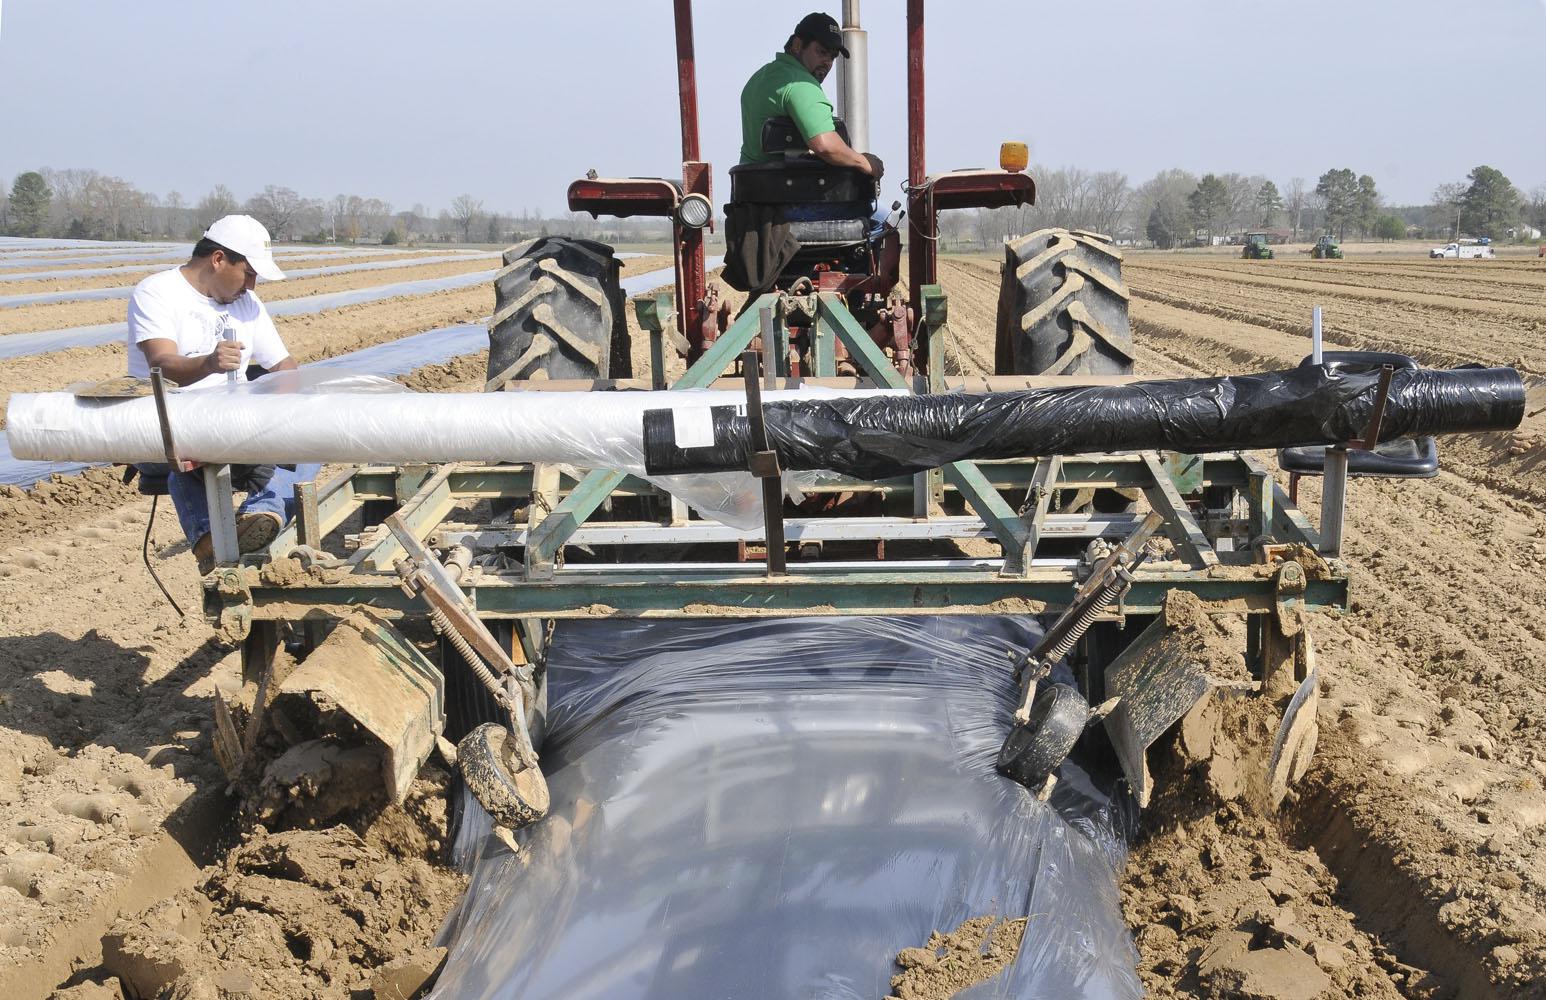 Juan Salinas drives the tractor that spreads black plastic over the row of bedded sweet potatoes in late March. A few inches of soil is placed over potatoes, and they are covered with black plastic until the plants begin to emerge from the soil.